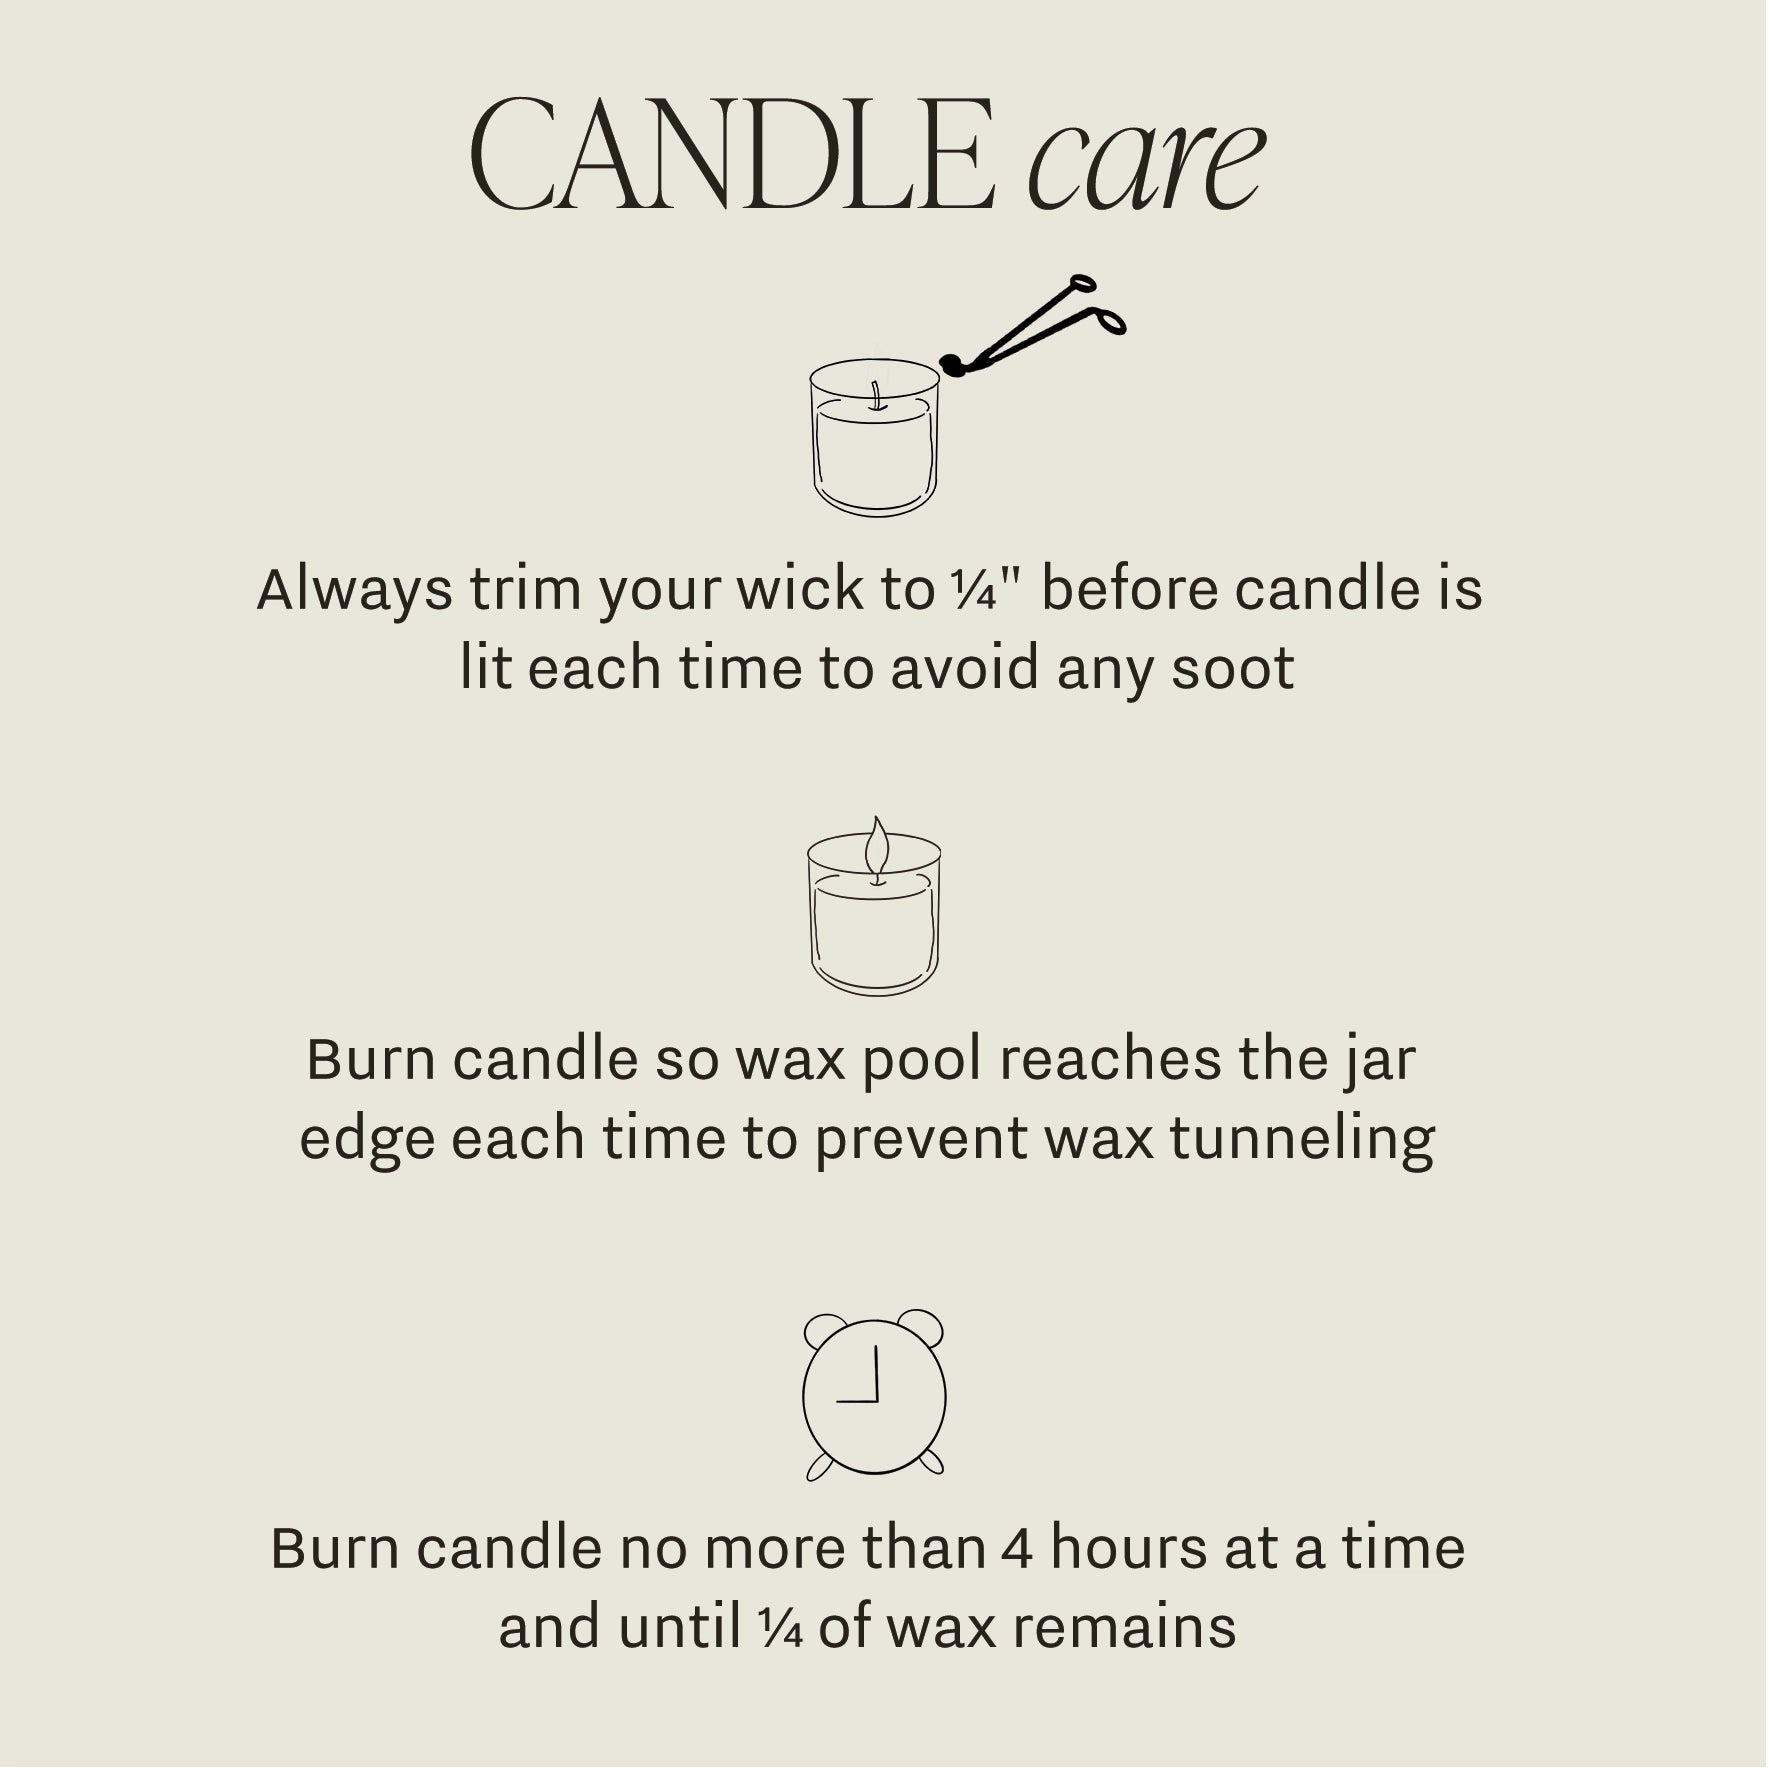 Candle care instruction page.